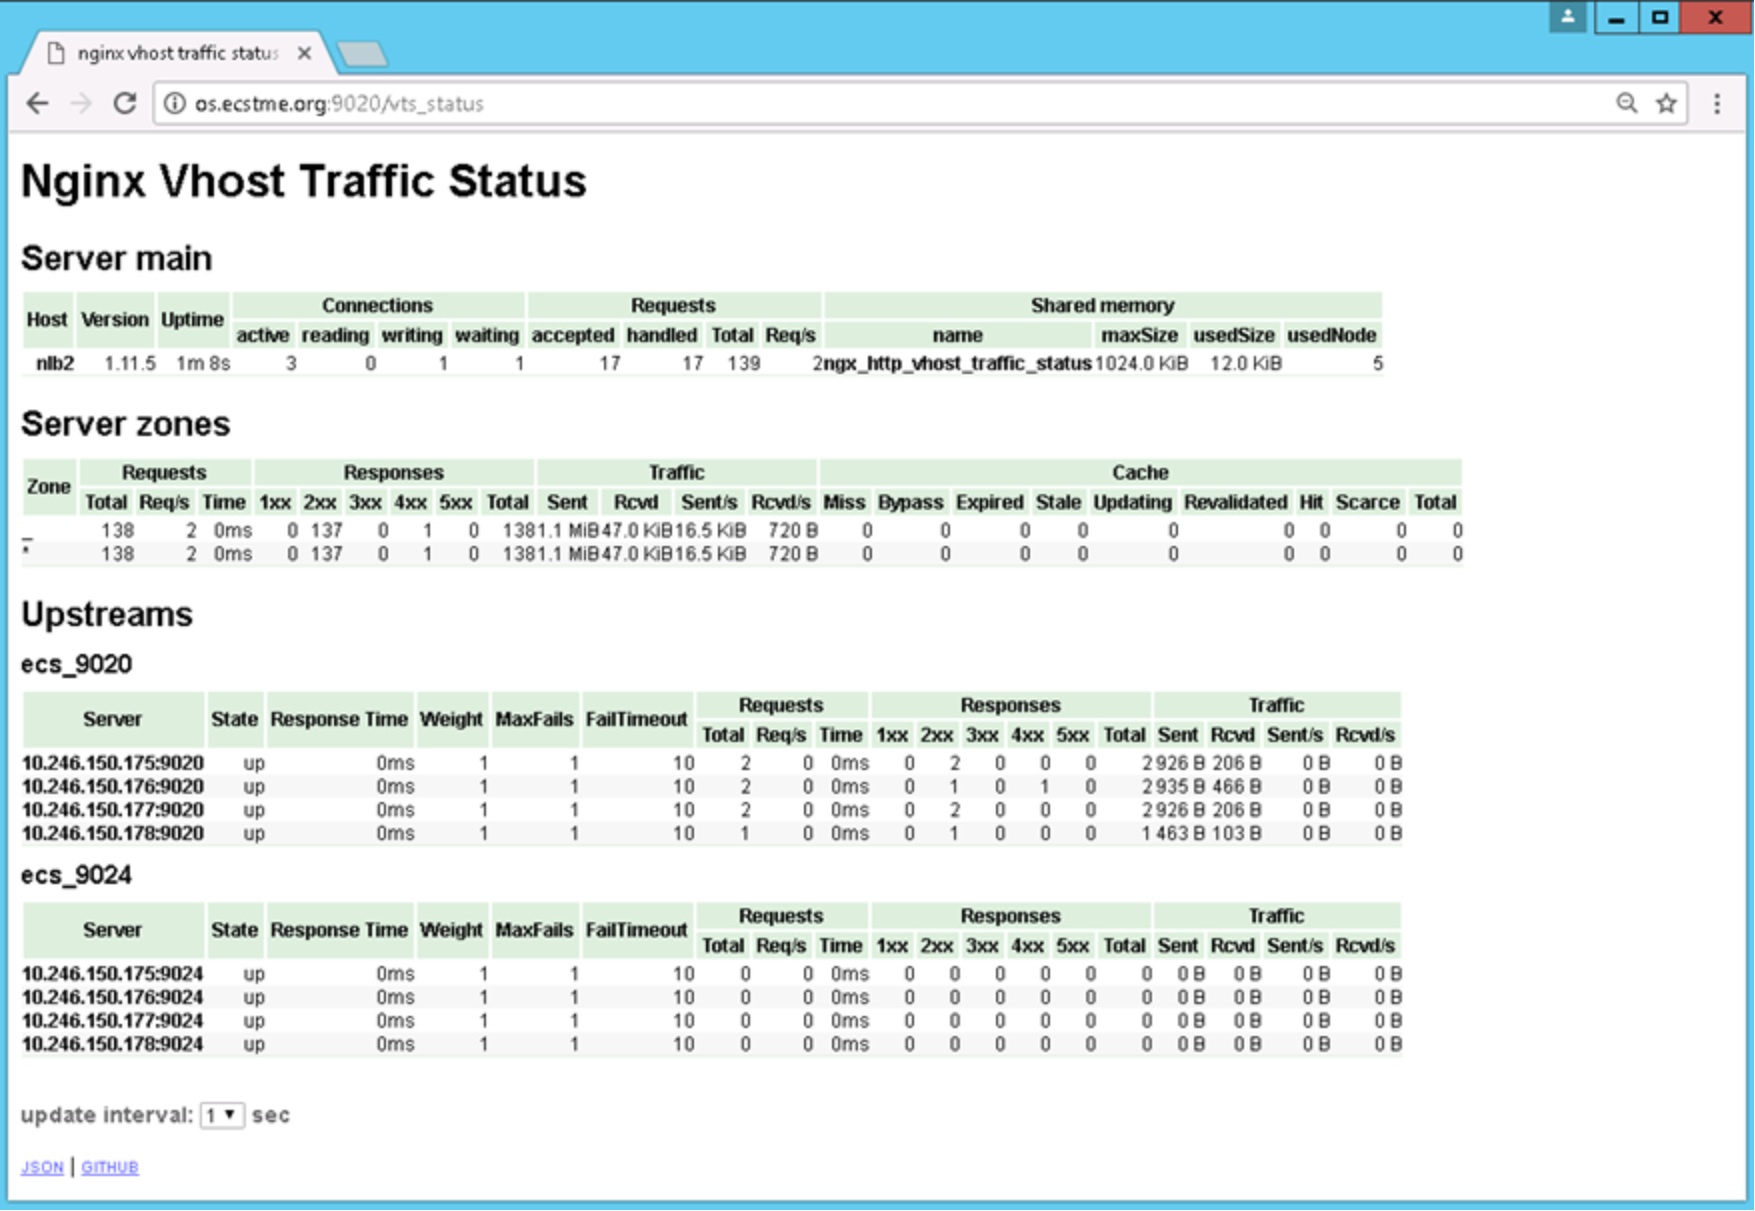 This is an example of an HTTP Traffic Web Page.